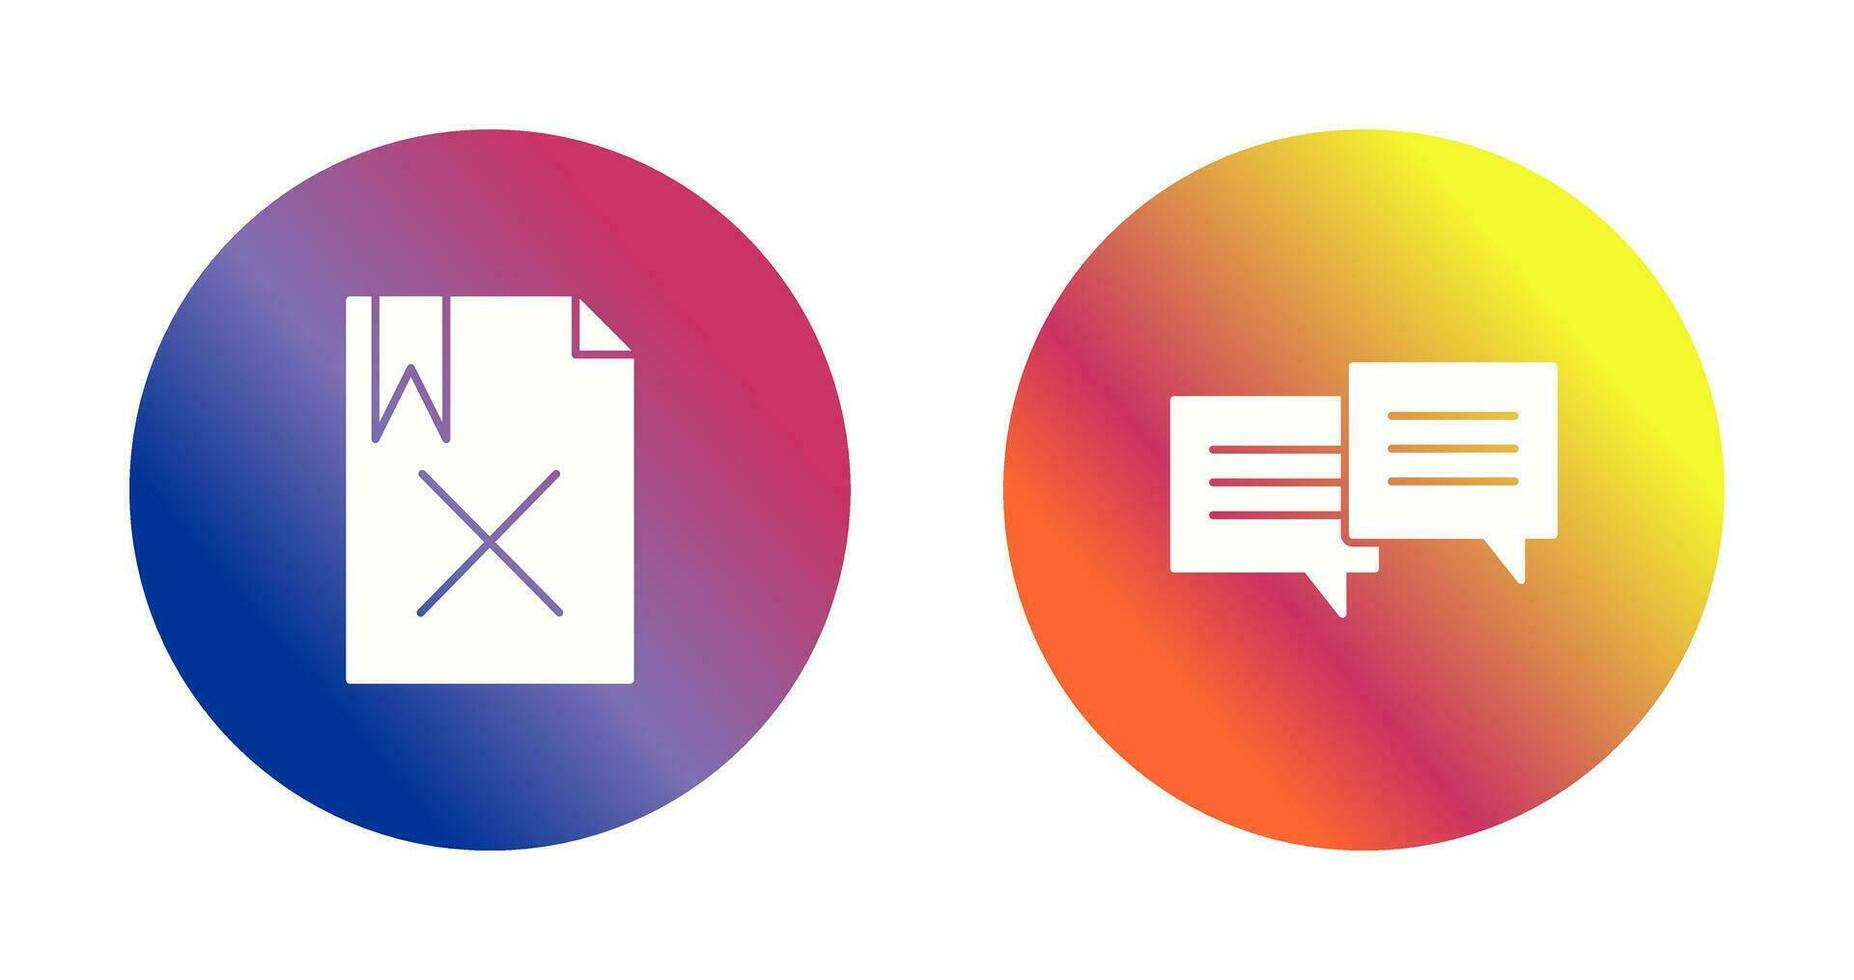 delete and two chat bubbles Icon vector